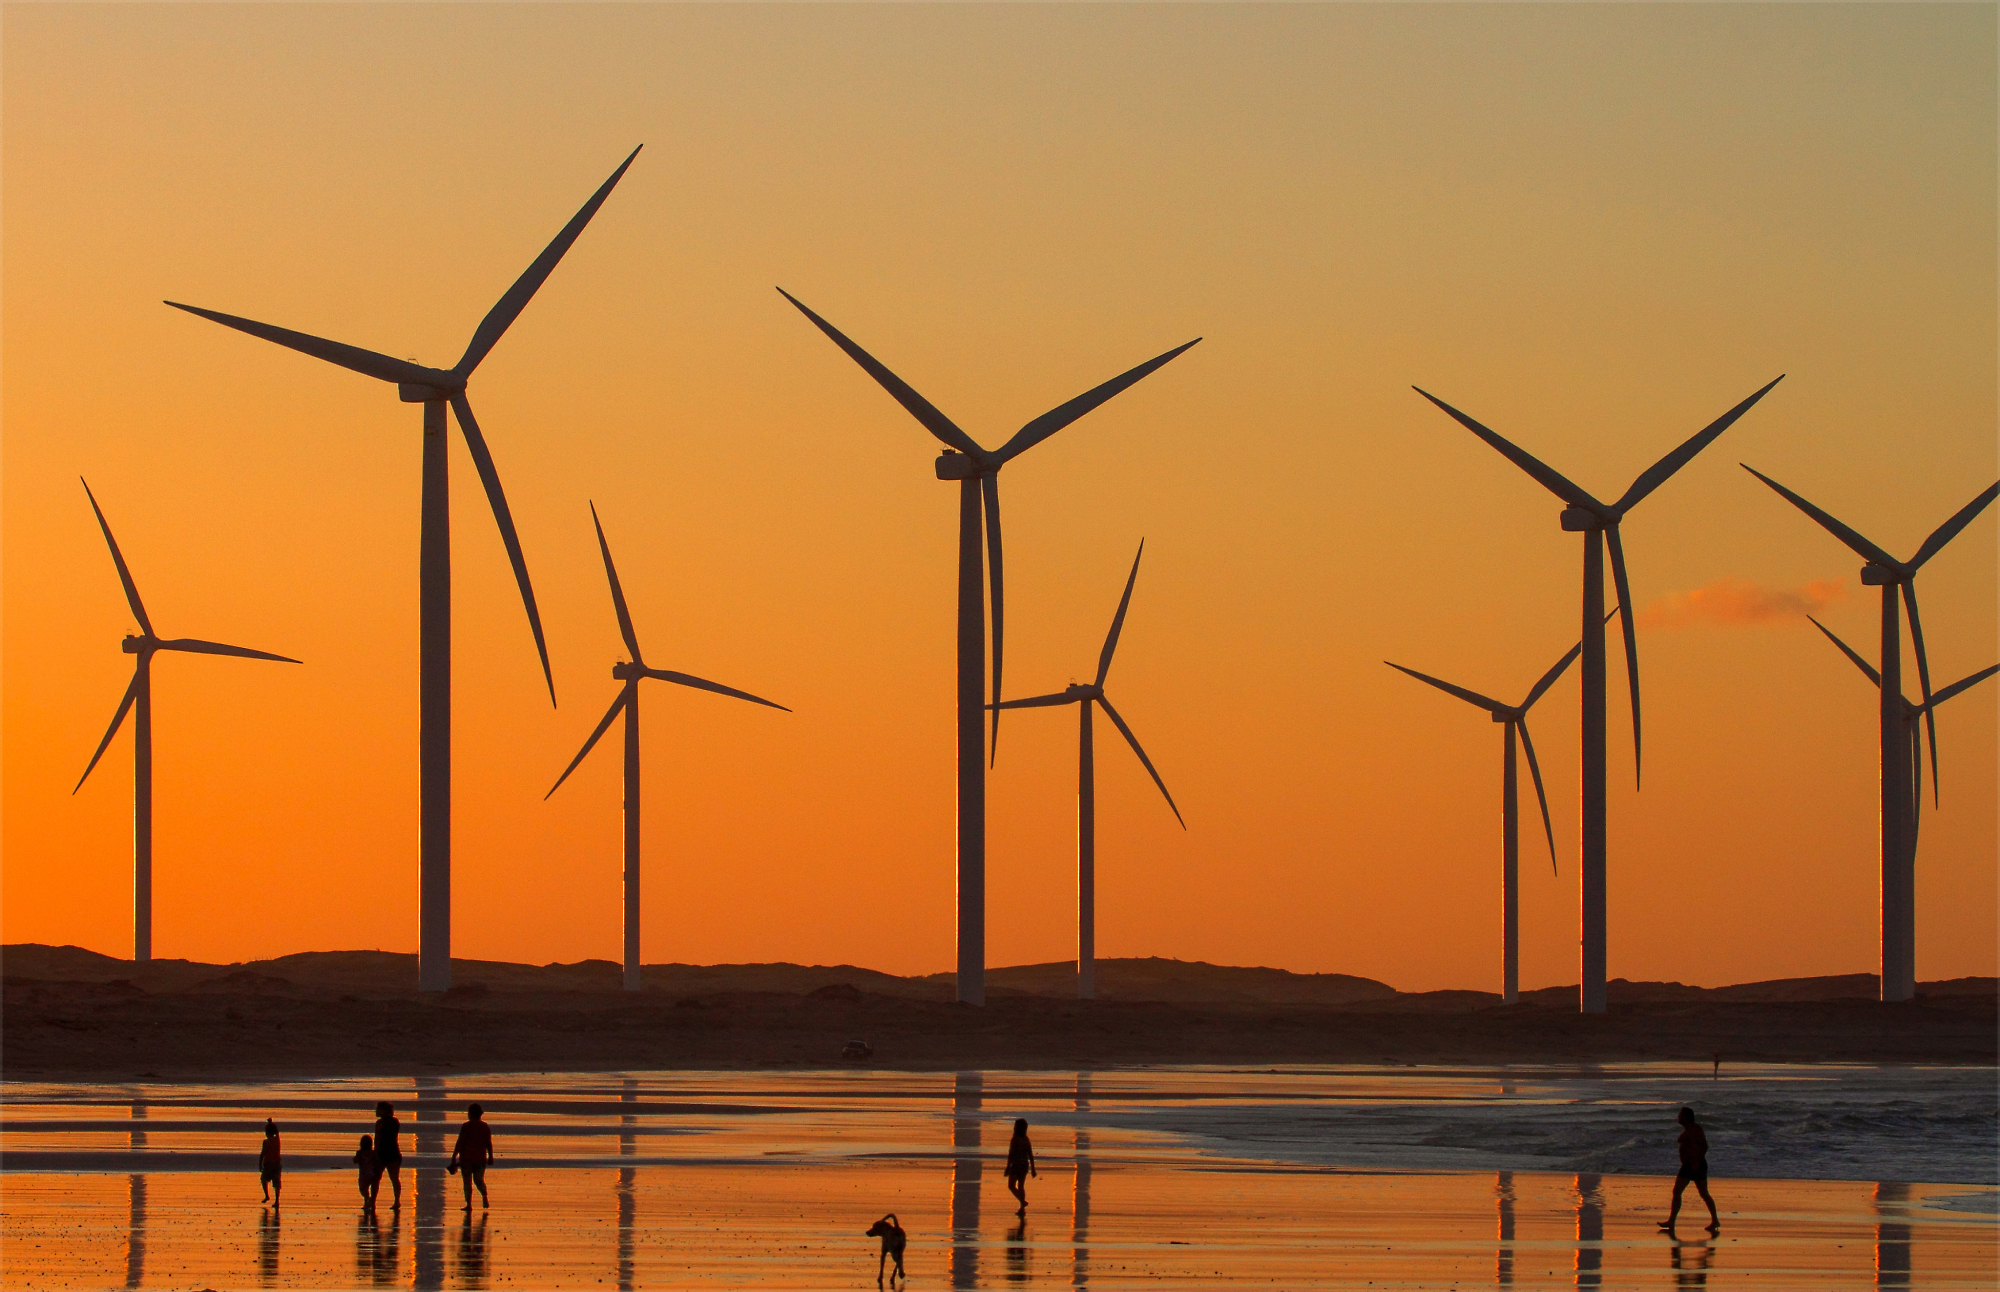 Several wind turbines stand tall against an orange sky during sunset